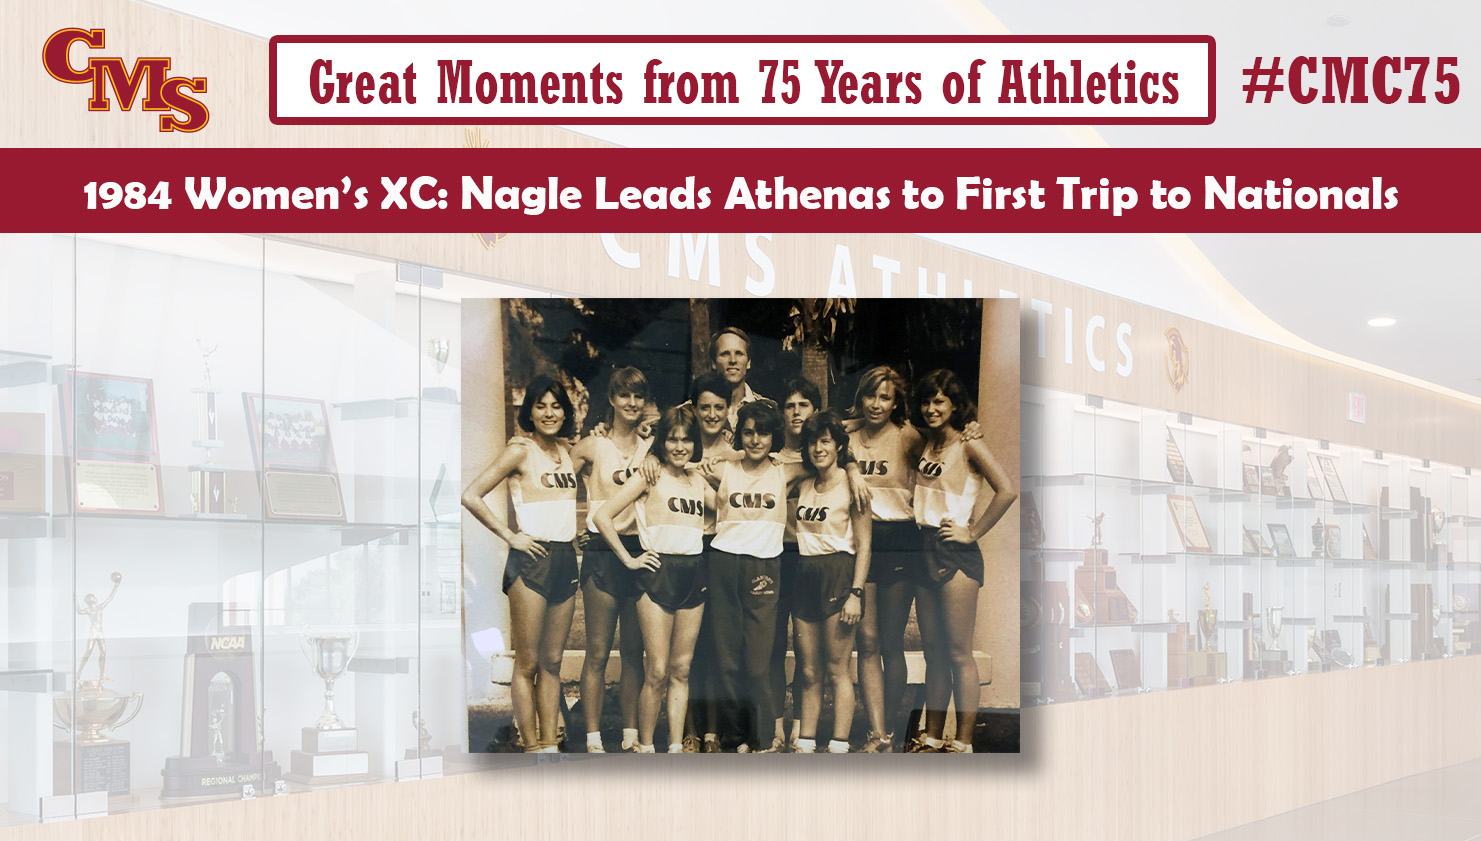 The 1984 CMS women's cross country team. Words over the photo read: Great Moments from 75 Years of Athletics, 1984 Women's XC: Nagle Leads Athenas to First Trip to Nationals